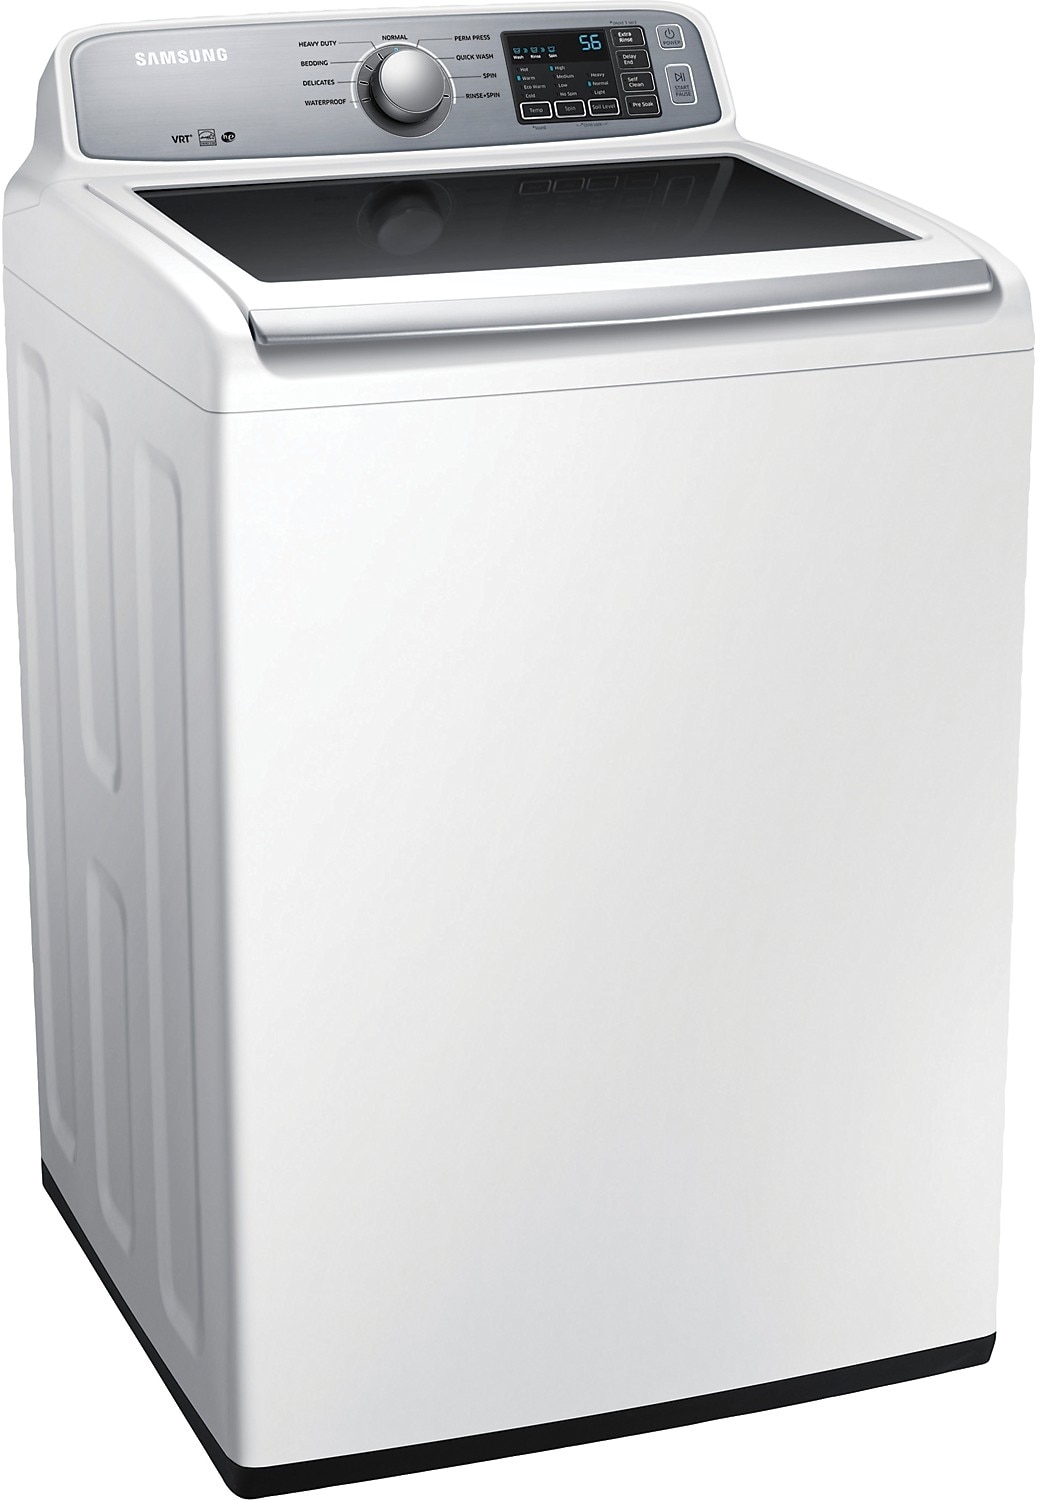 samsung-5-2-cu-ft-large-capacity-top-load-washer-white-the-brick